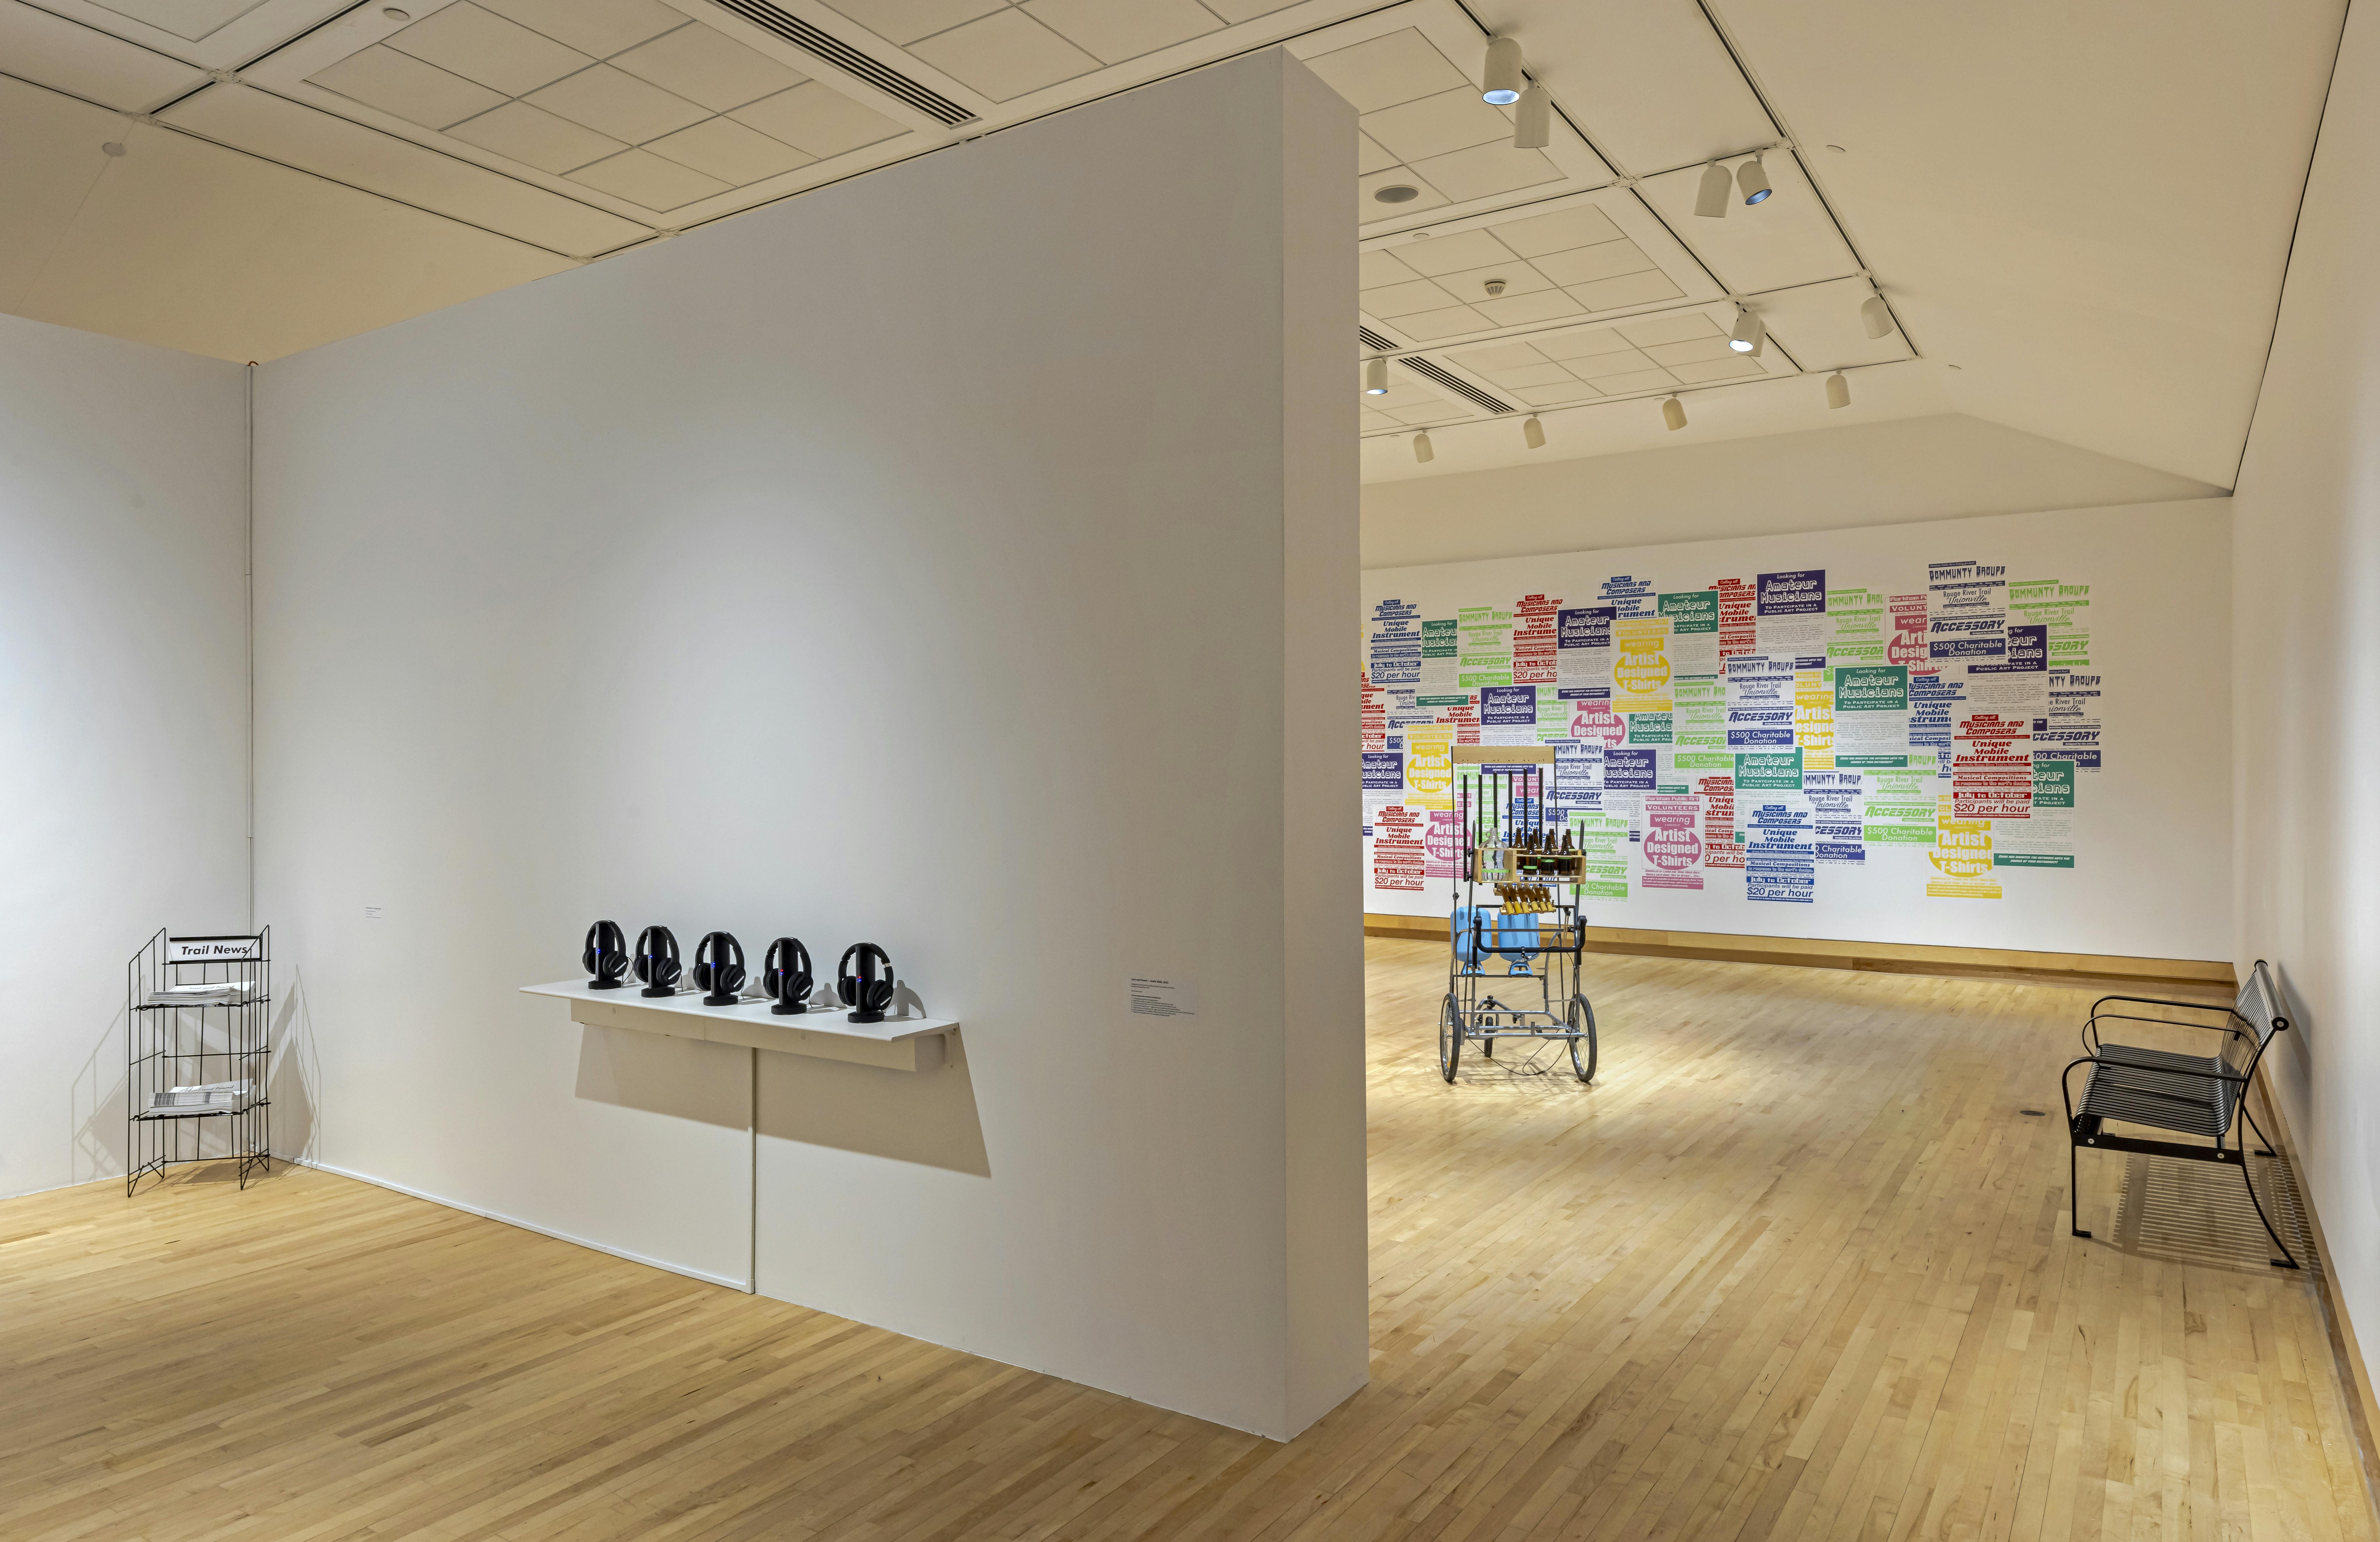 Lost and Found exhibition installation view at the Varley Art Gallery of Markham. Photo by Toni Hafkenscheid.